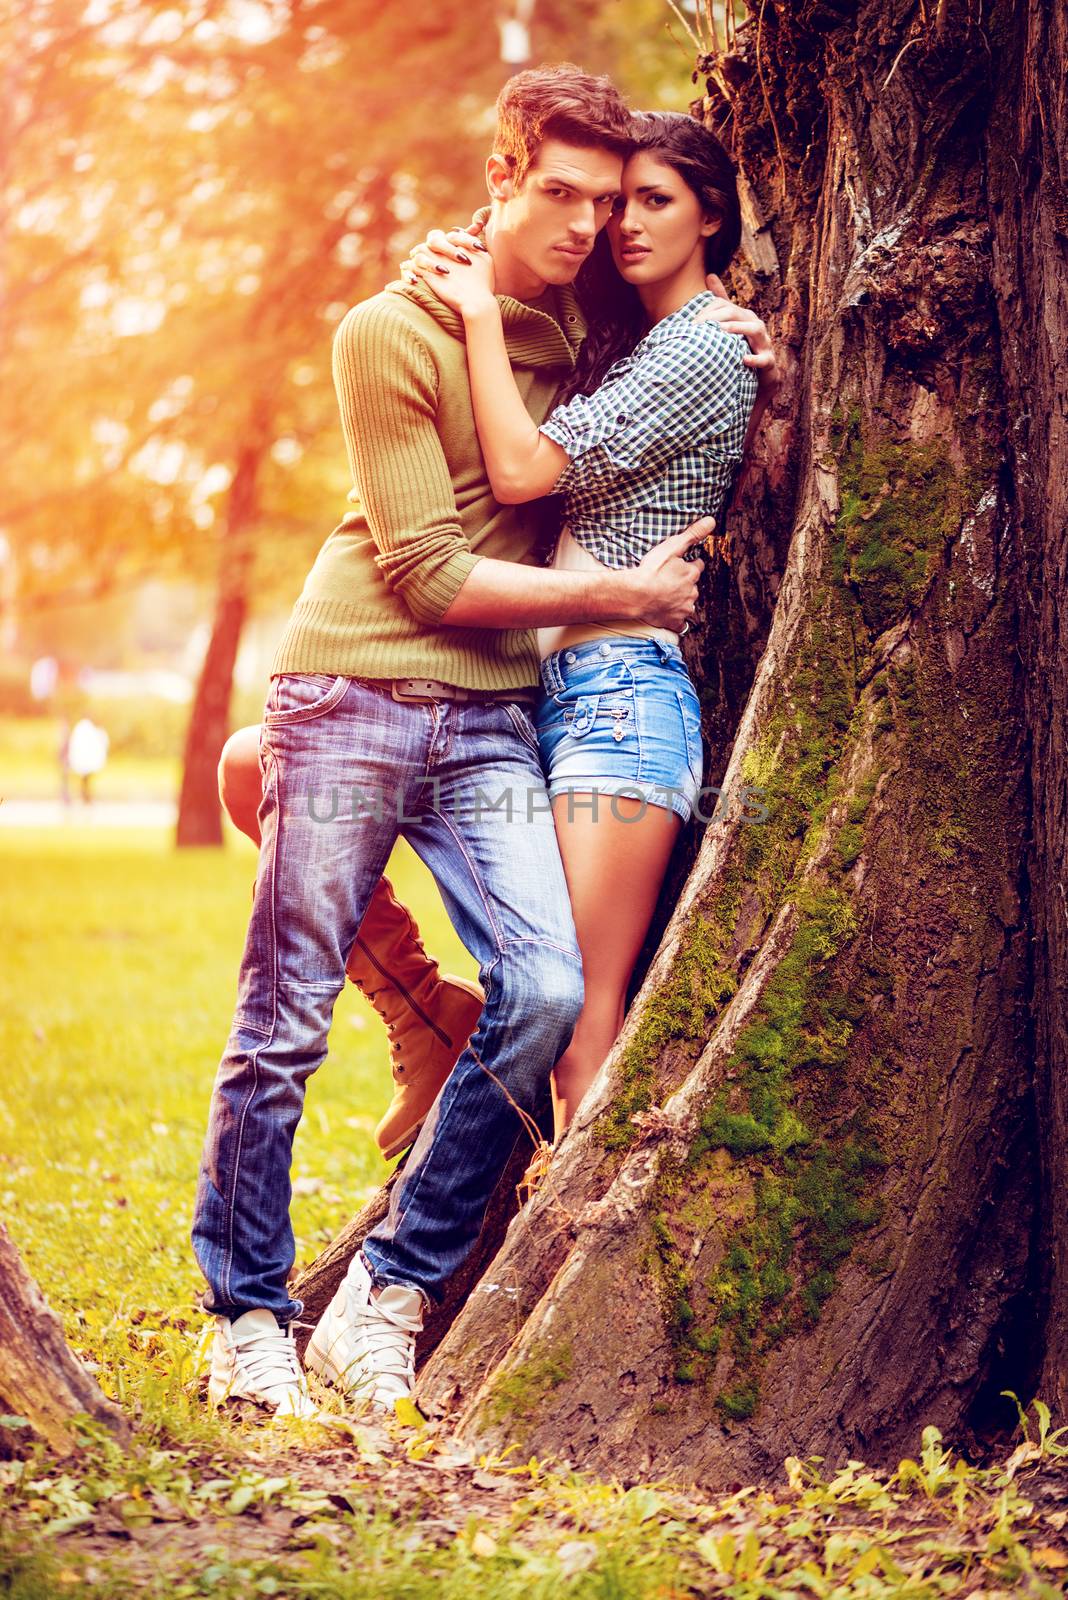 Beautiful lovely couple enjoying in sunny park in autumn colors.